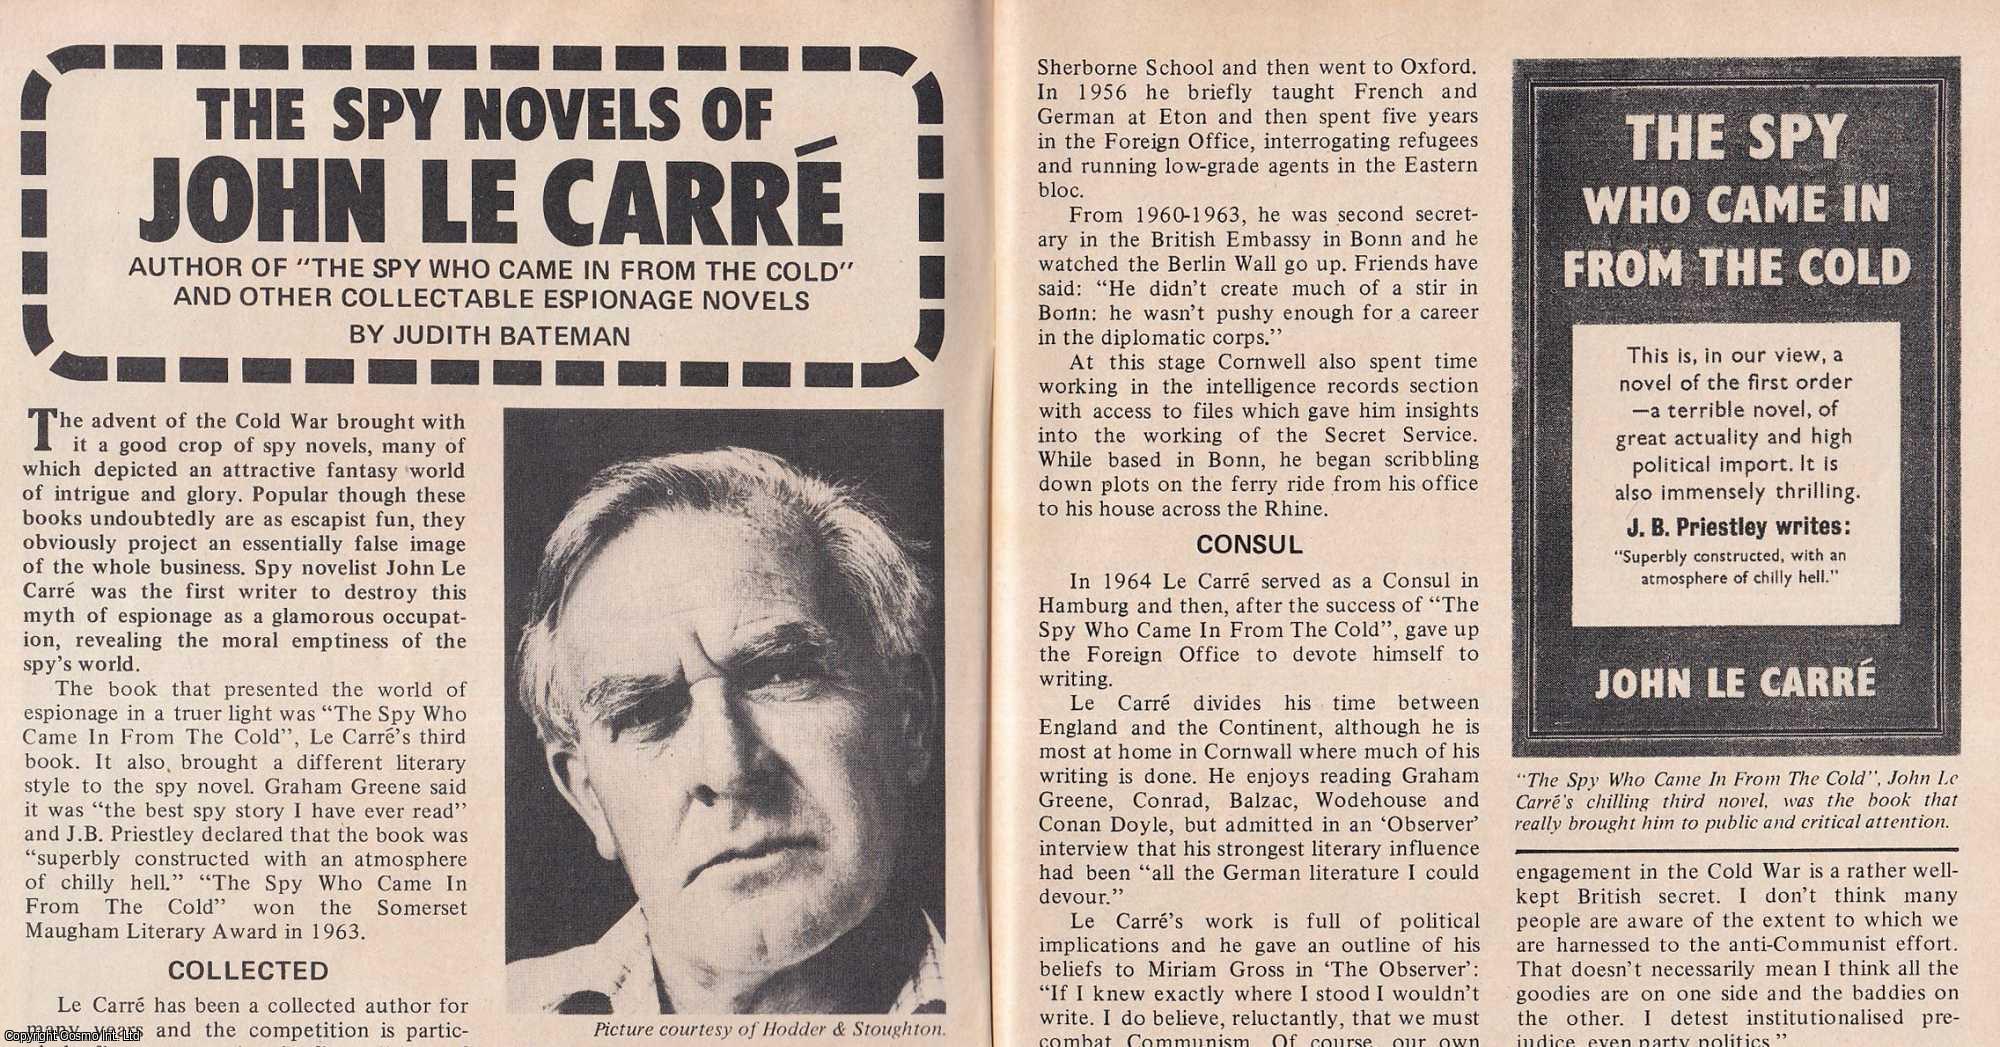 Judith Bateman - The Spy Novels of John Le Carre. This is an original article separated from an issue of The Book & Magazine Collector publication.